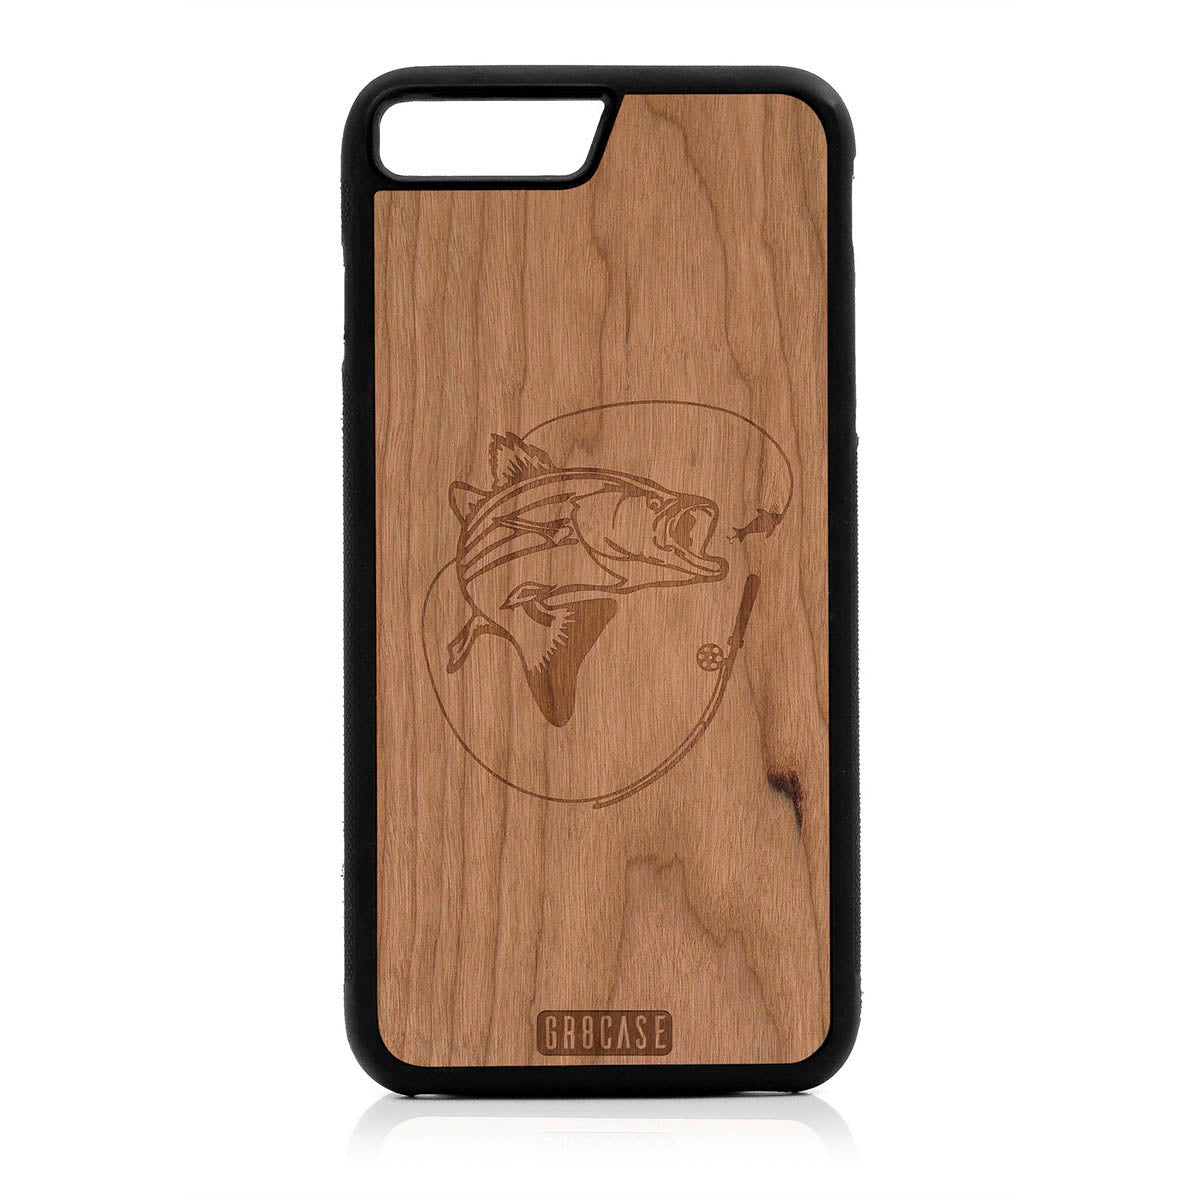 Fish and Reel Design Wood Case For iPhone 7 Plus / 8 Plus by GR8CASE